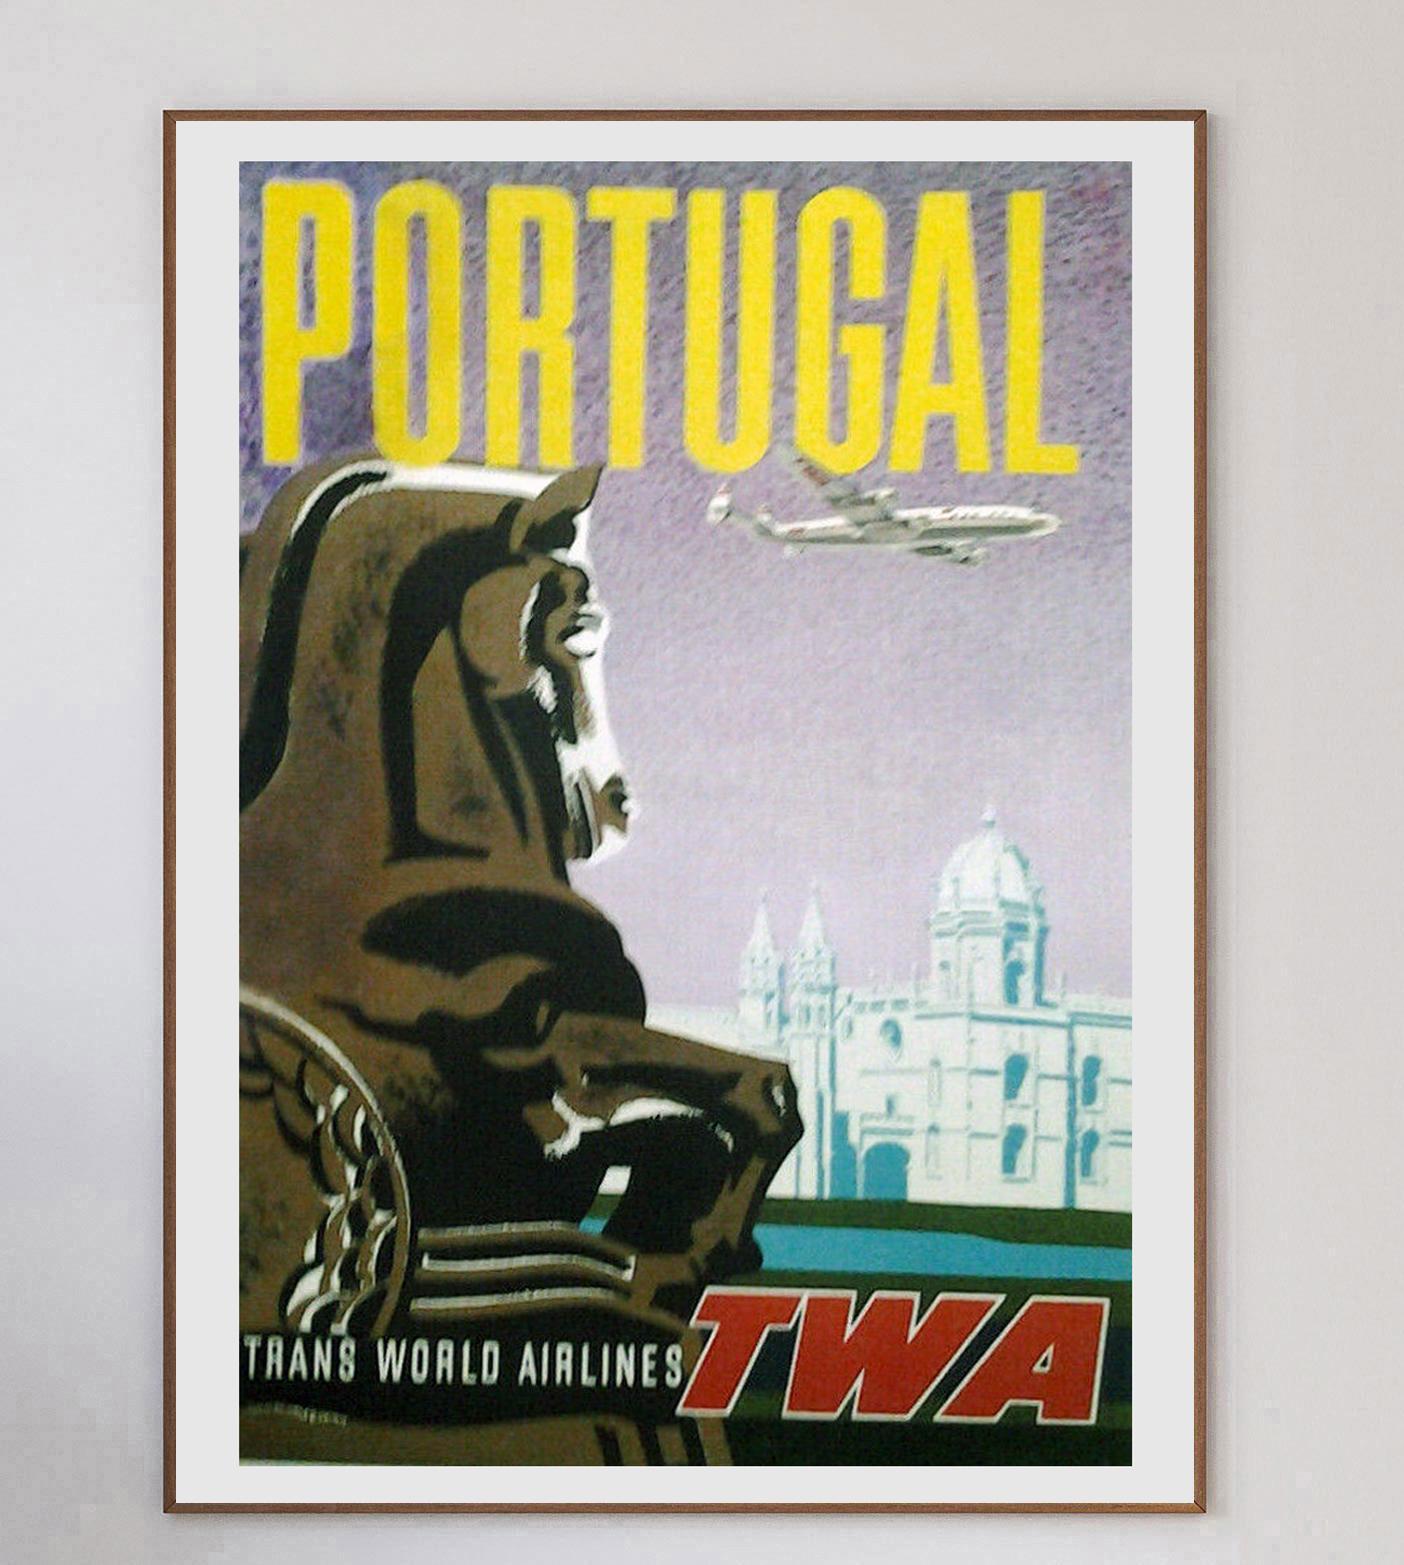 Depicting the Equestrian Statue of Joseph in the countries capital of Lisbon, this stunning poster was created for Howard Hughes‚Äô Trans World Airlines promoting their routes to Portugal.

The poster is illustrated by influential American artist